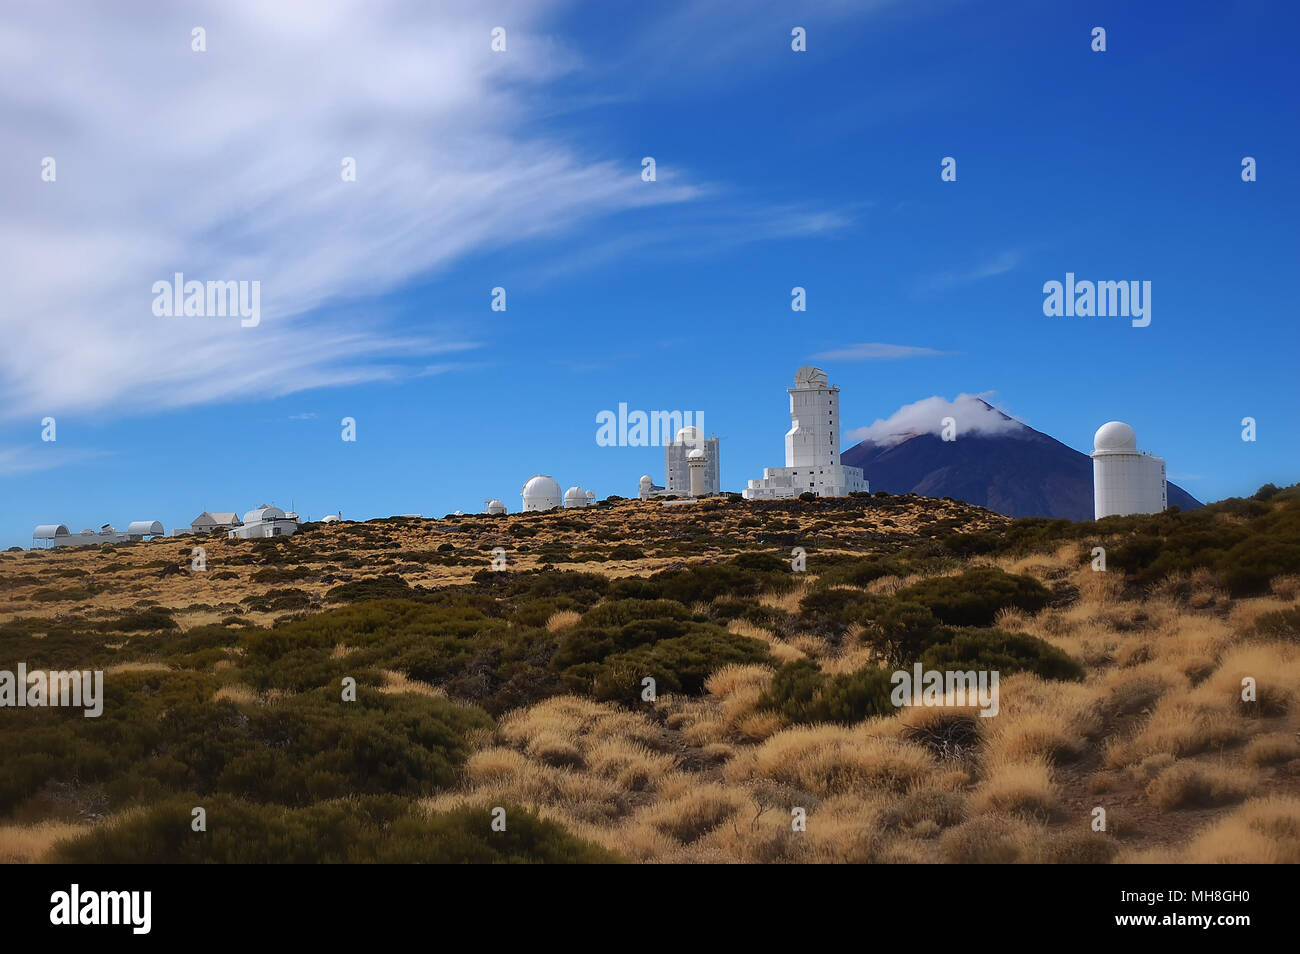 Teide Observatory - Observatorio del Teide - with Mount Teide in the background. Stock Photo